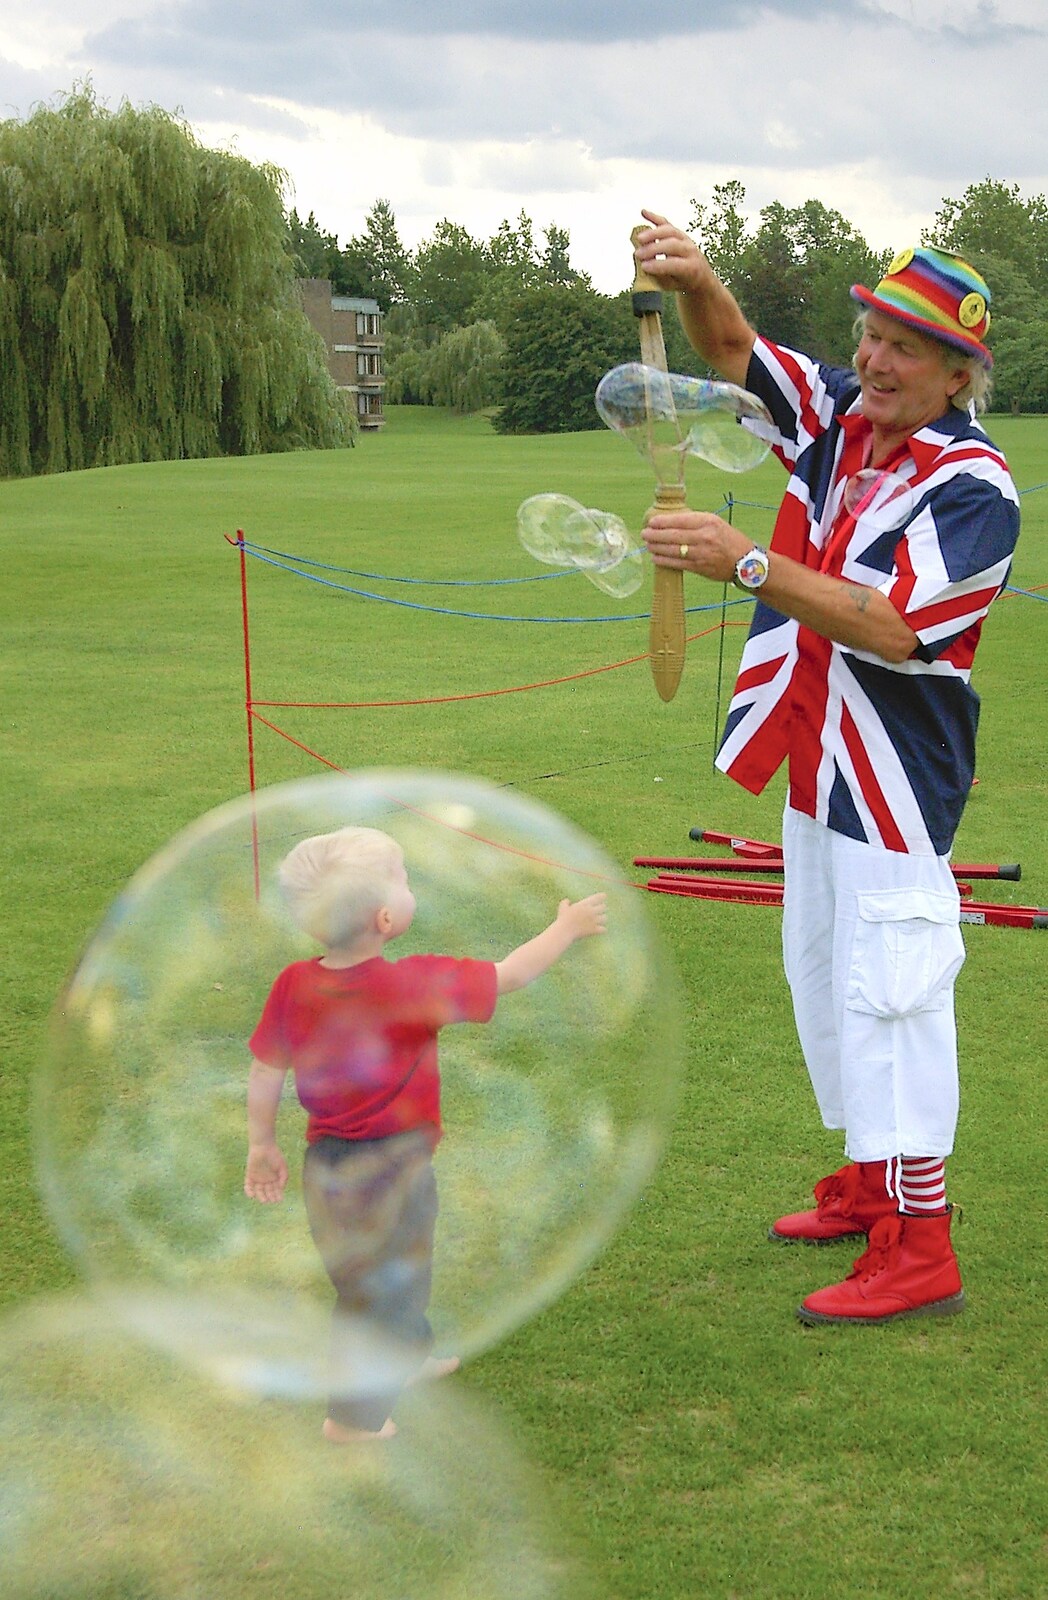 The boy in the bubble from Qualcomm's Summer Circus Thrash, Churchill College, Cambridge - 18th August 2006